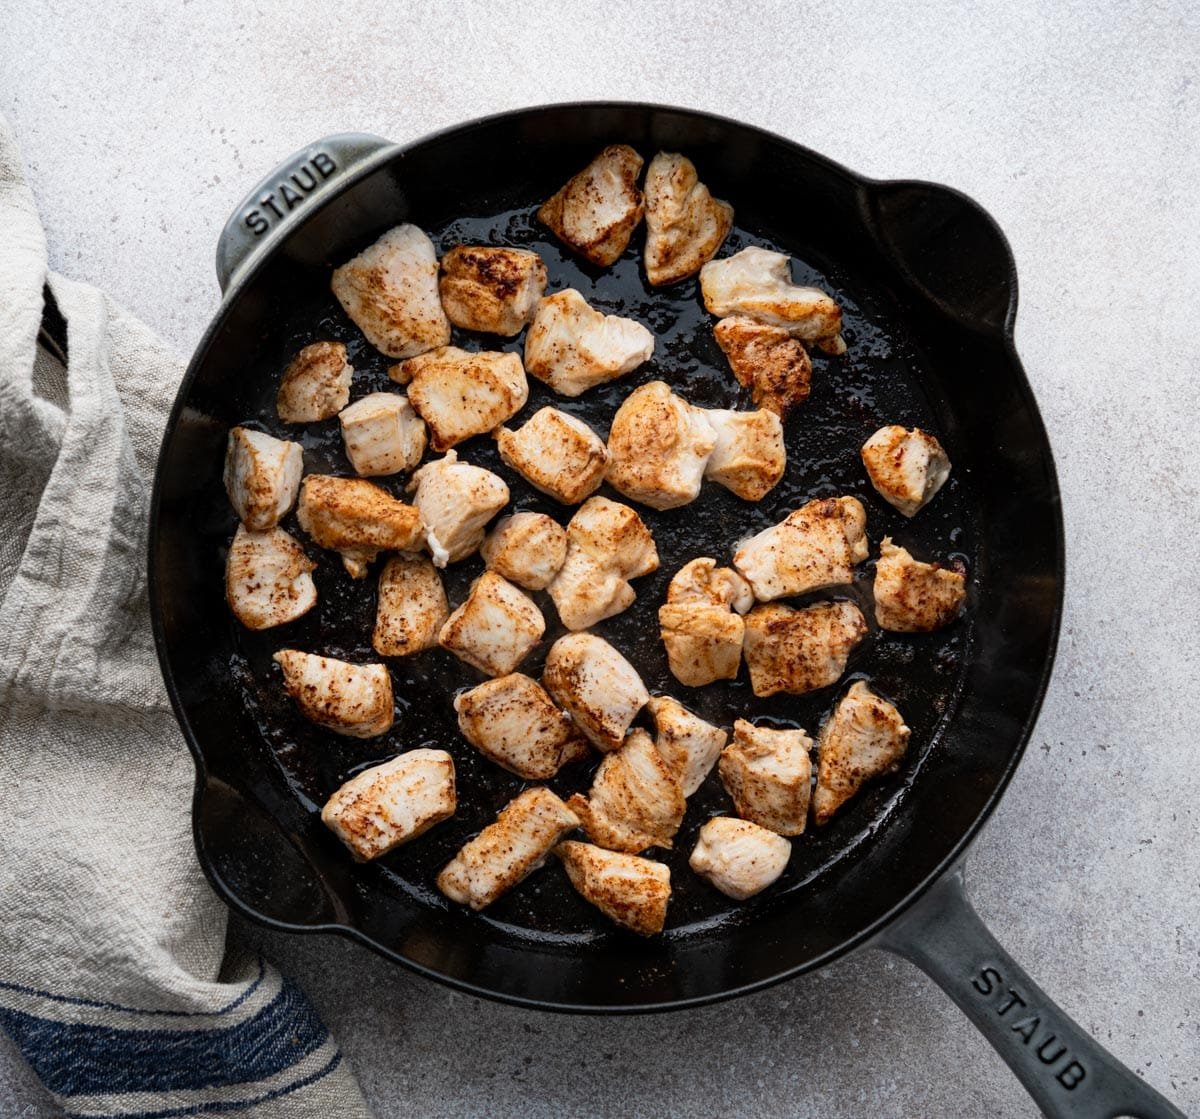 Browning diced chicken in a cast iron skillet.